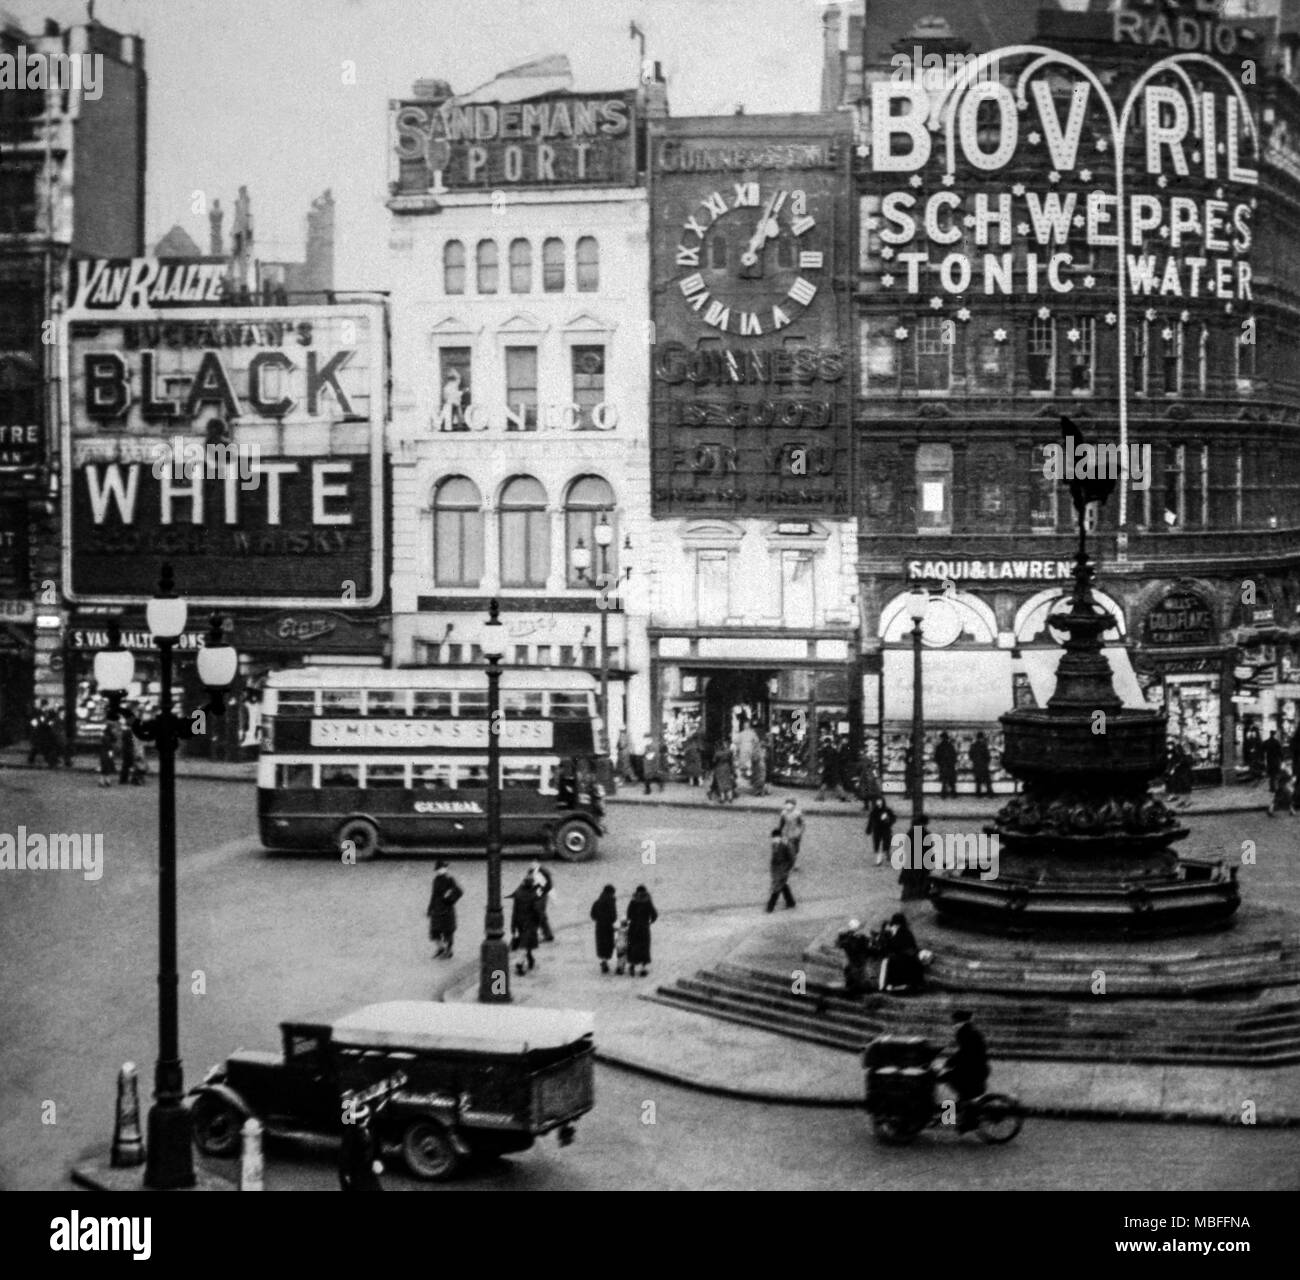 Piccadilly Circus, London in the 1920s Please note that due to the age of the image their might be imperfections showing. Stock Photo